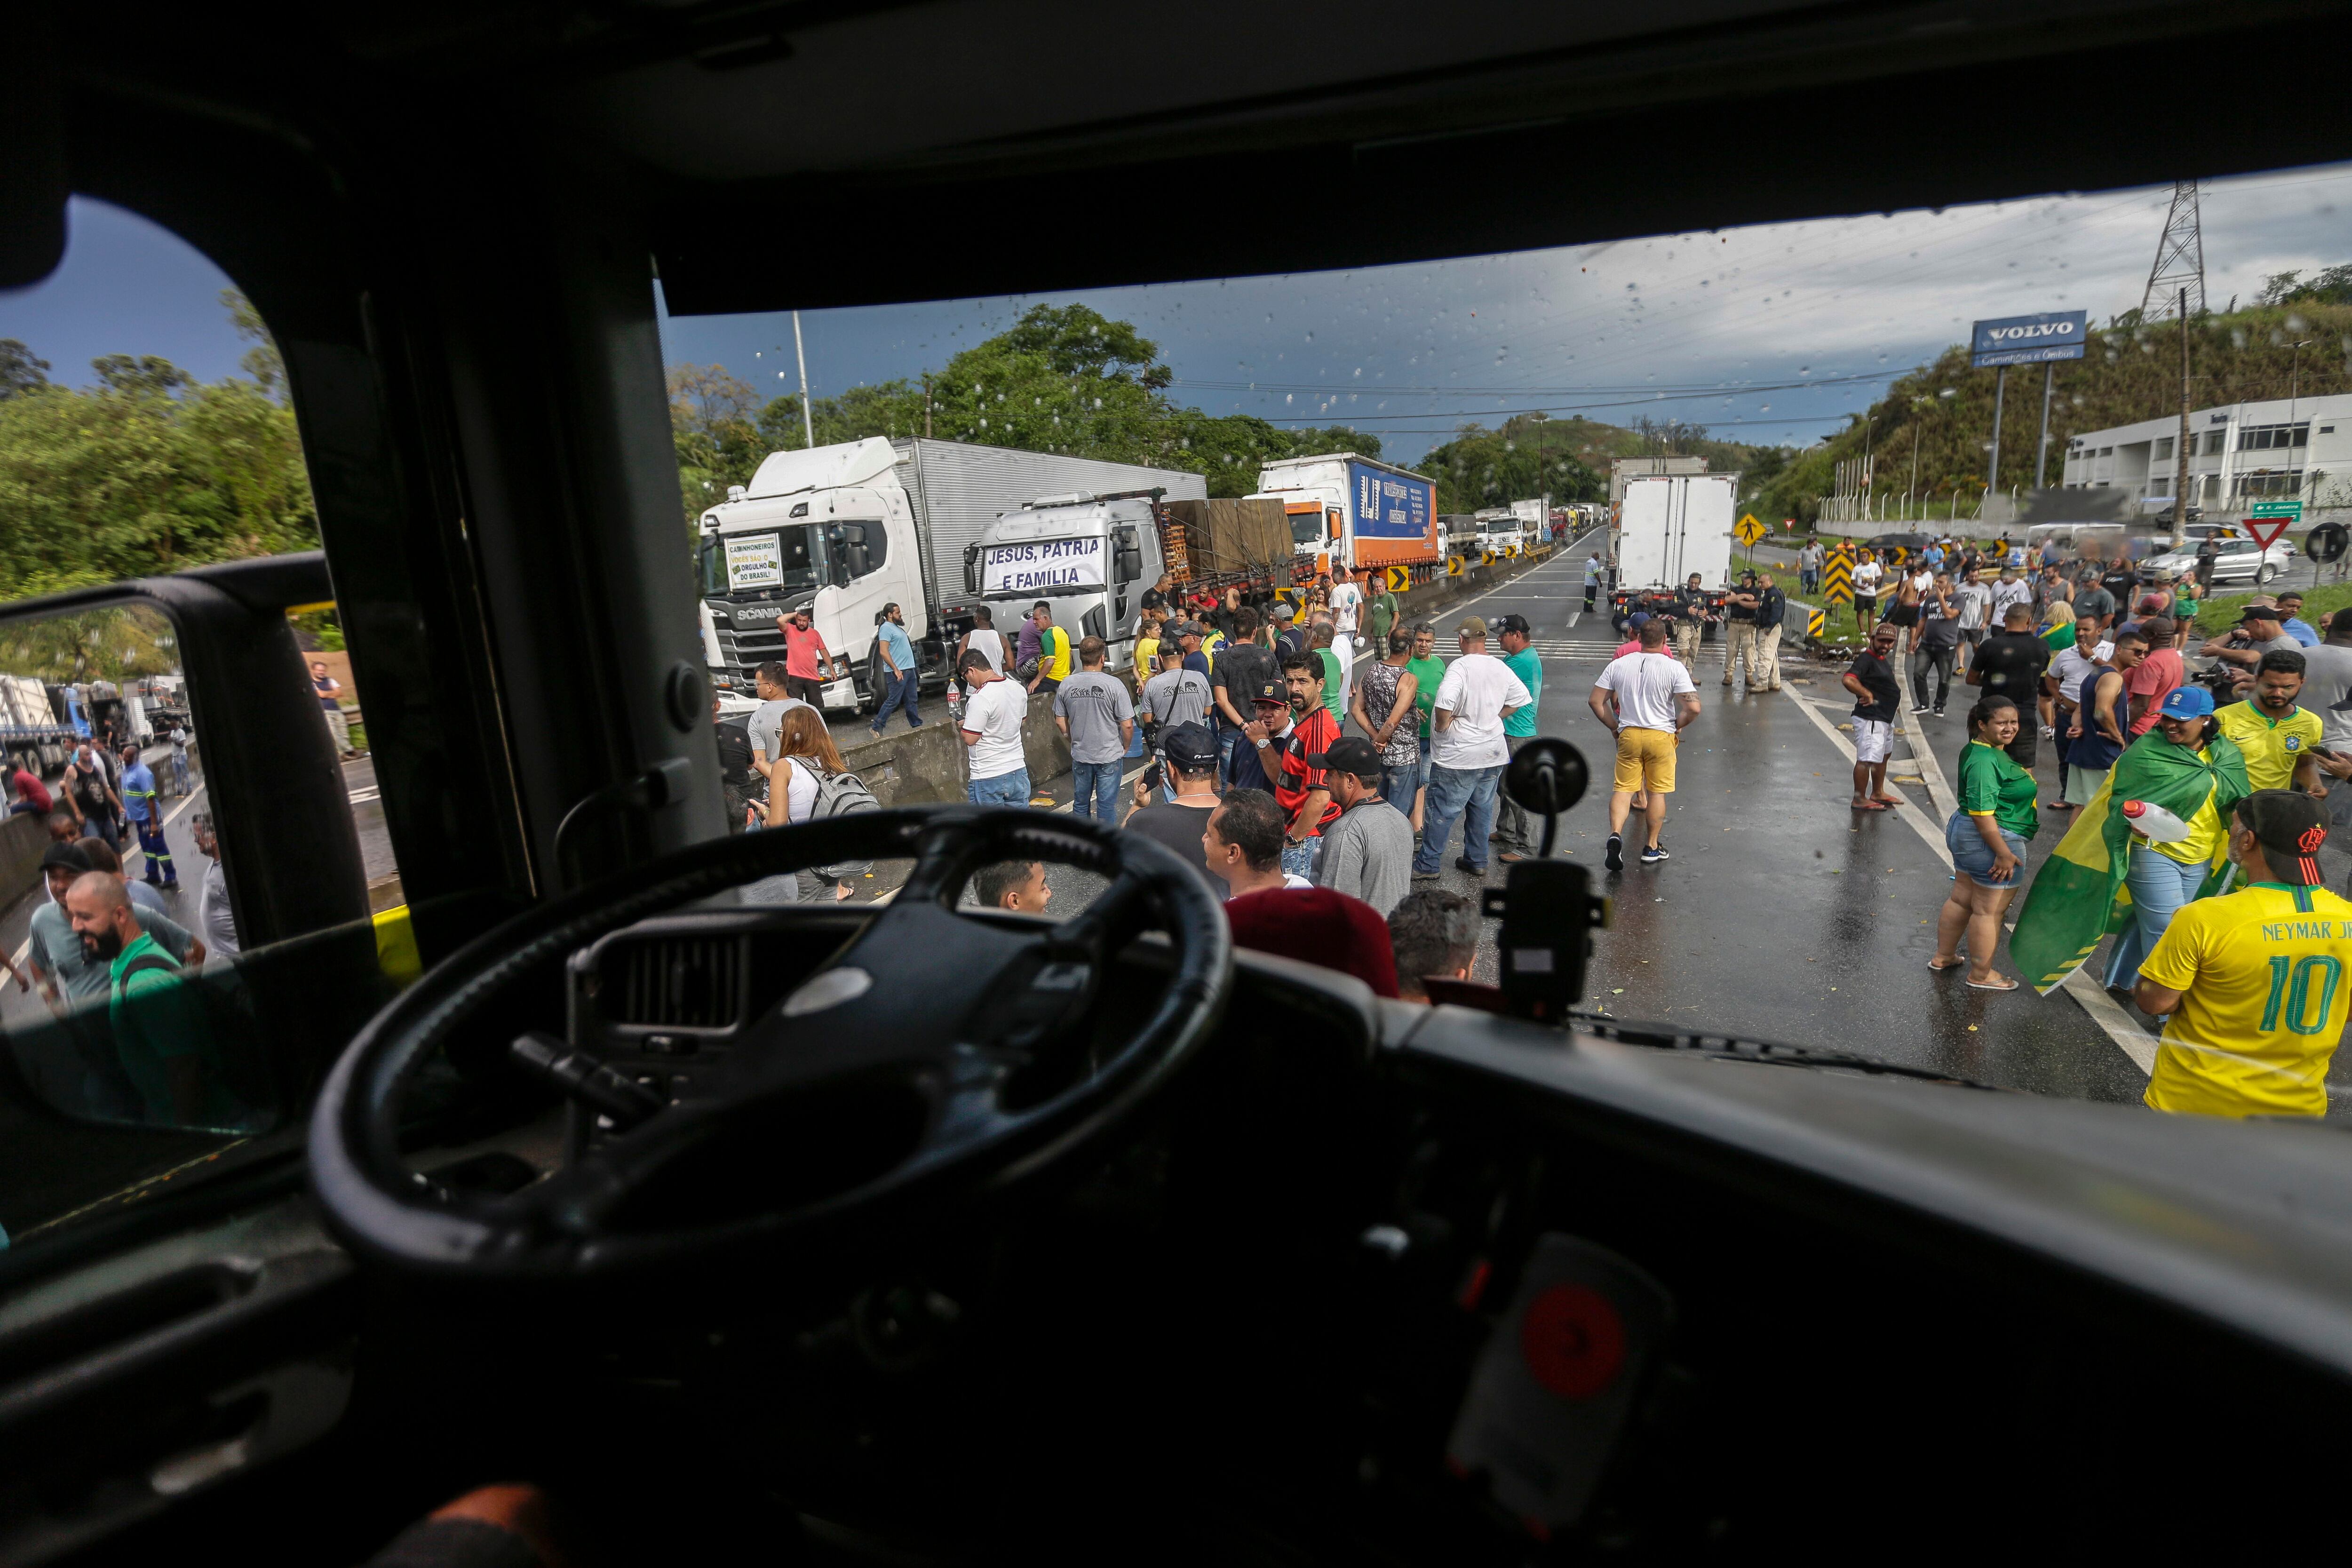 People protest during the truckers' blockade today, on the Presidente Dutra highway, near Volta Redonda (Brazil).